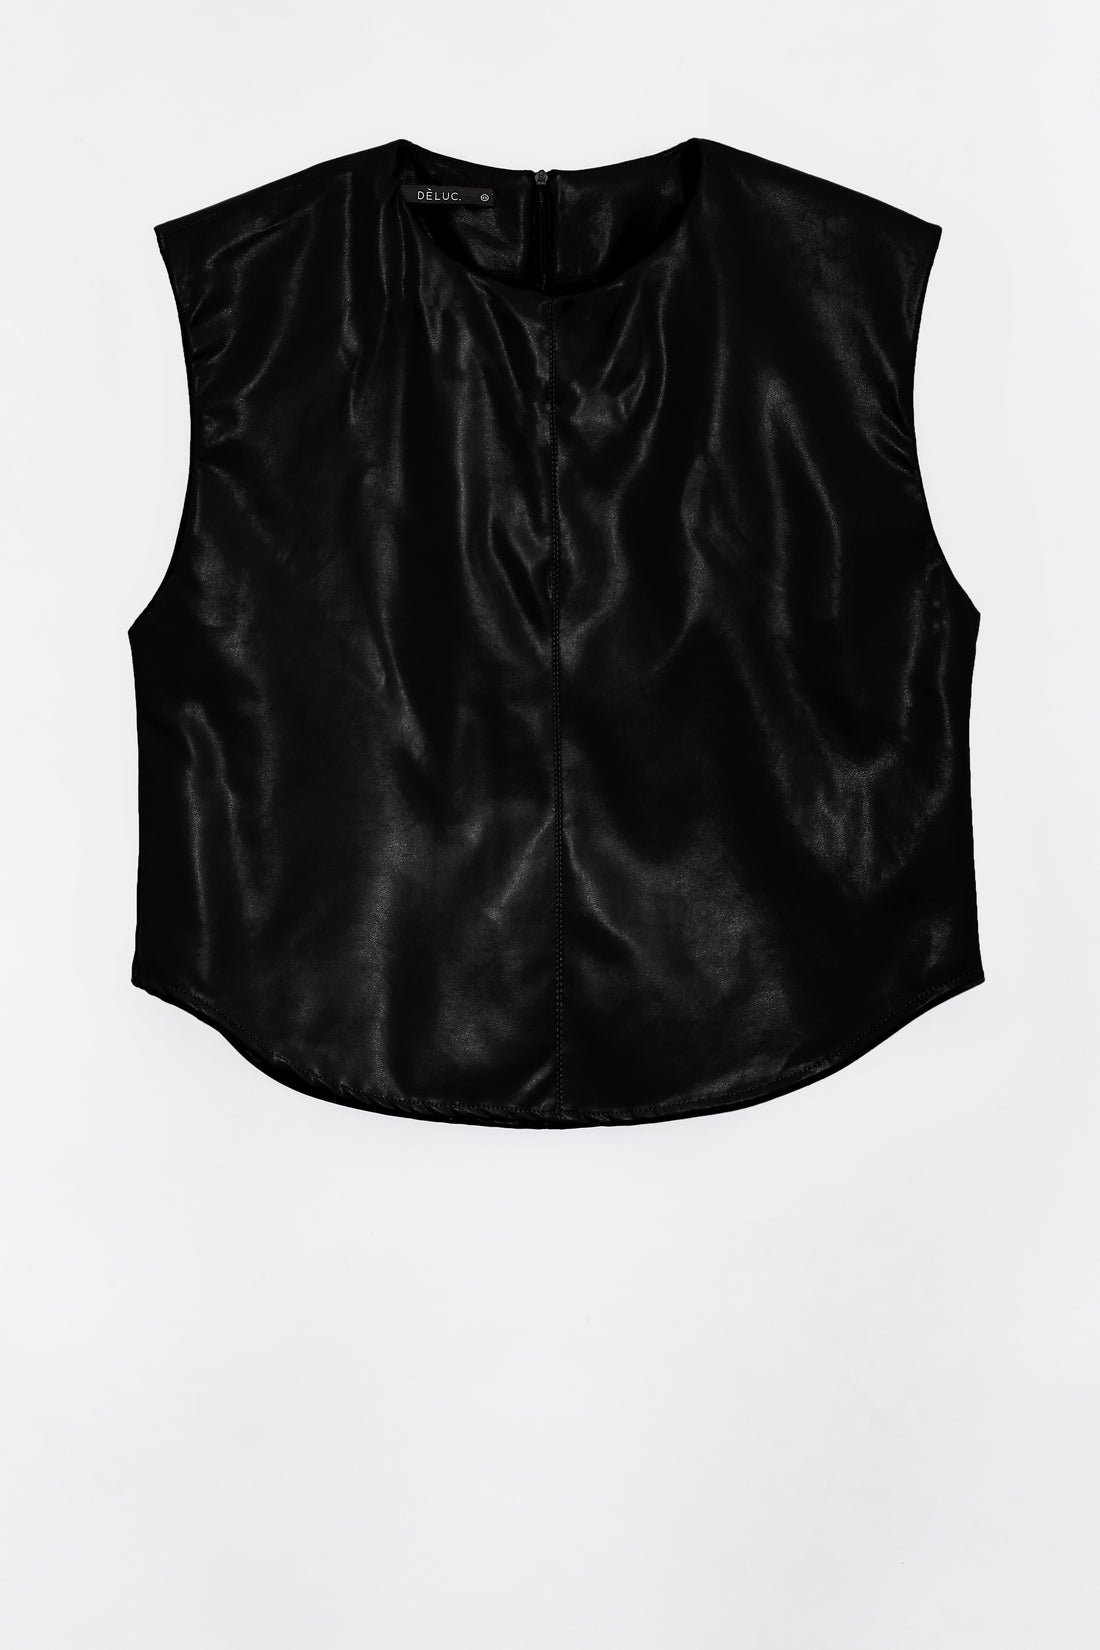 Deluc Black Sleeveless Faux Leather Top